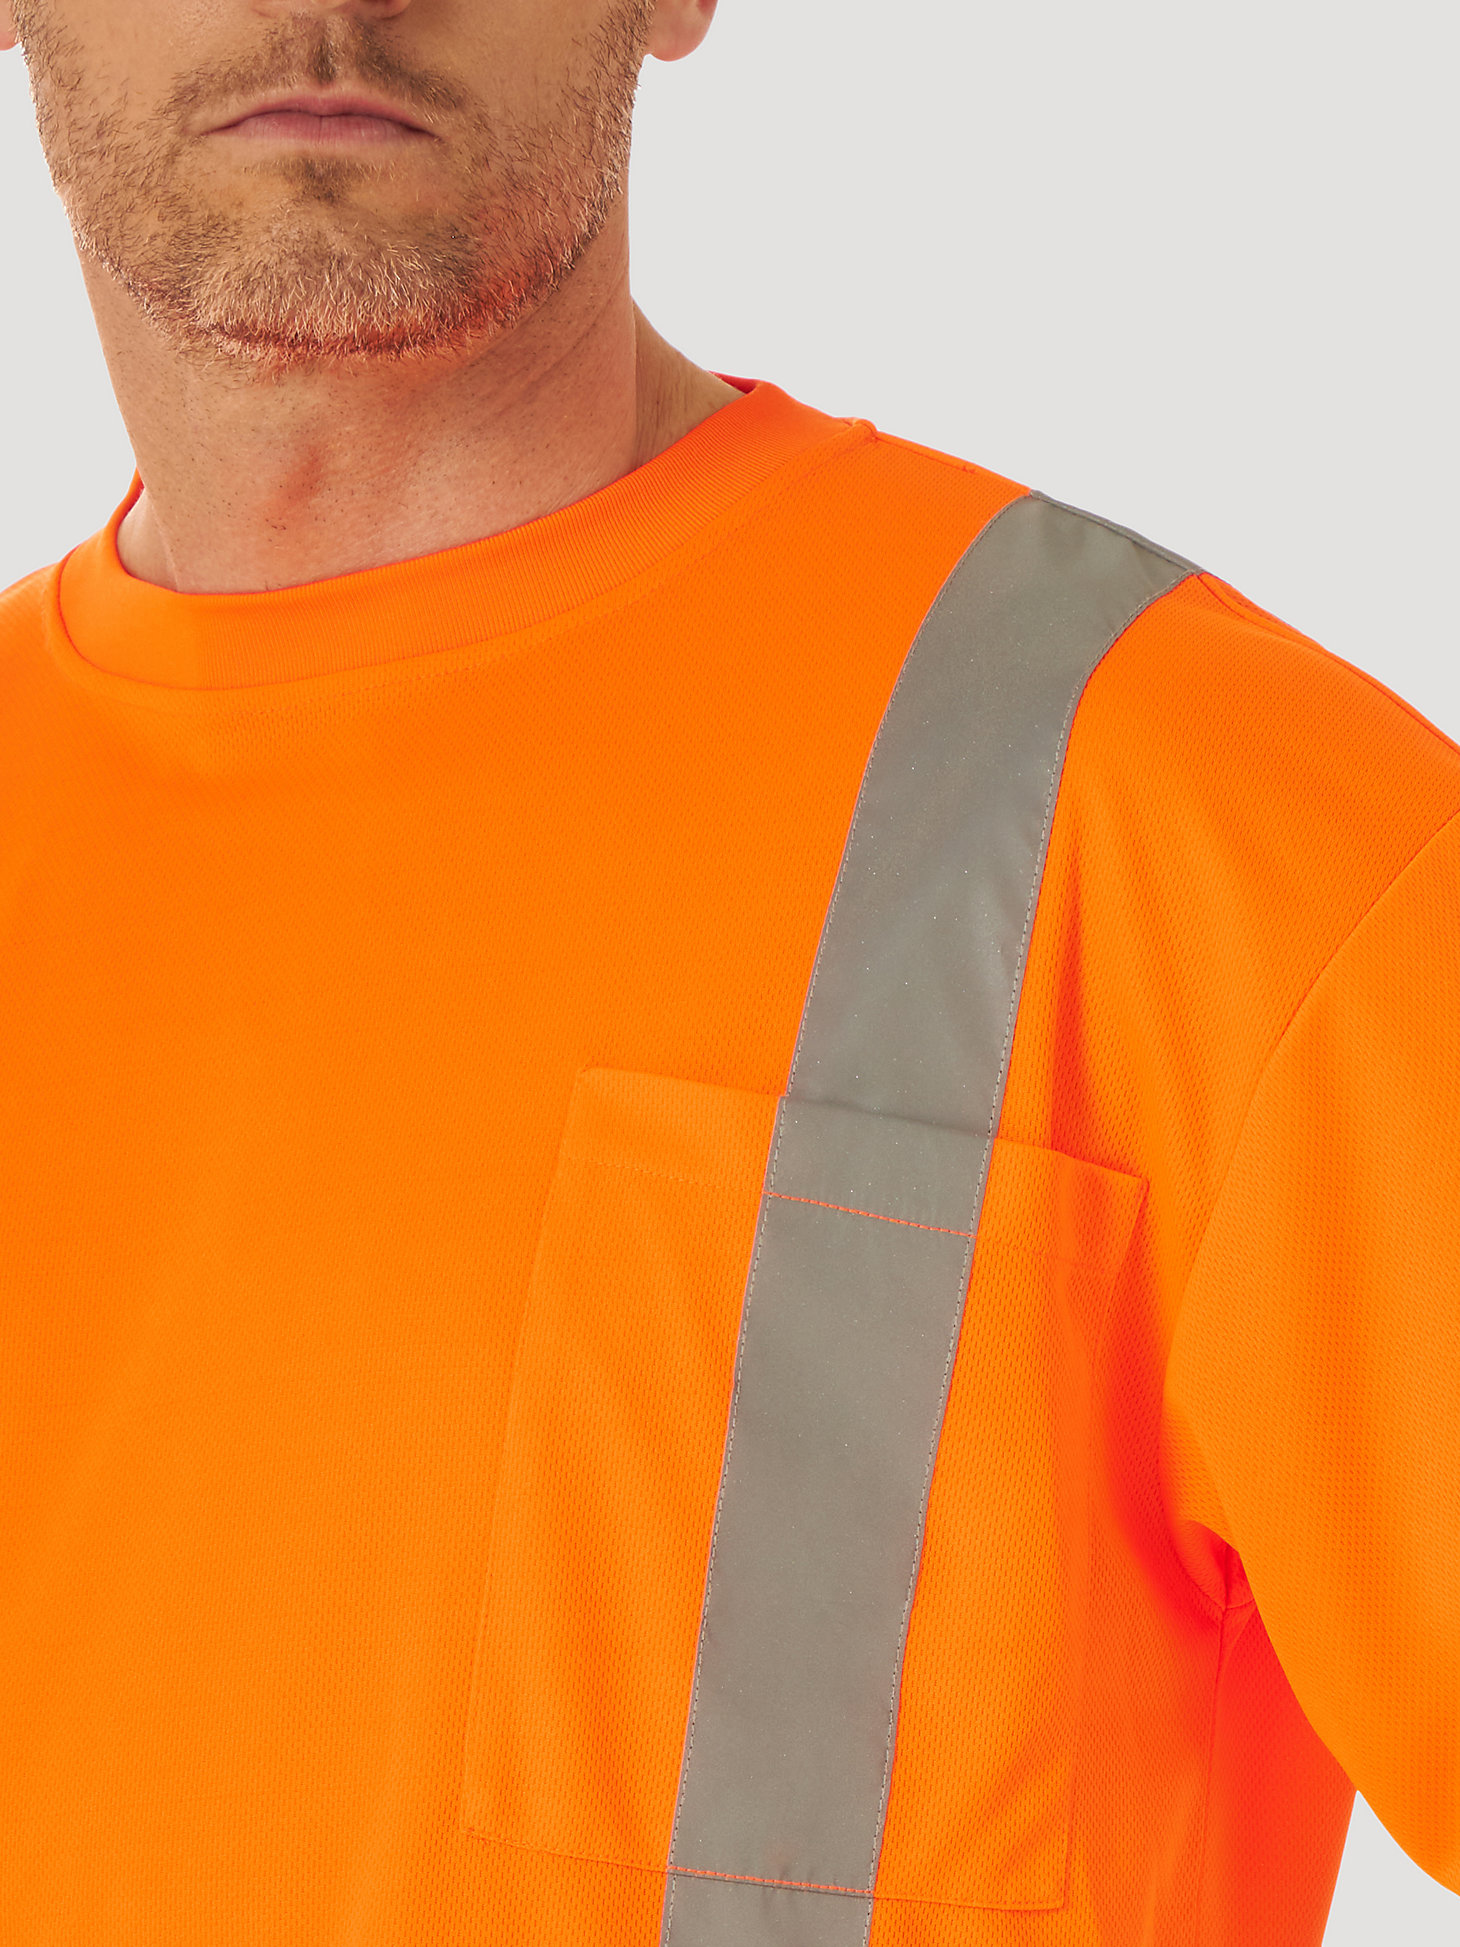 Wrangler® RIGGS Workwear® Long Sleeve High Visibility T-Shirt in Safety Orange alternative view 3